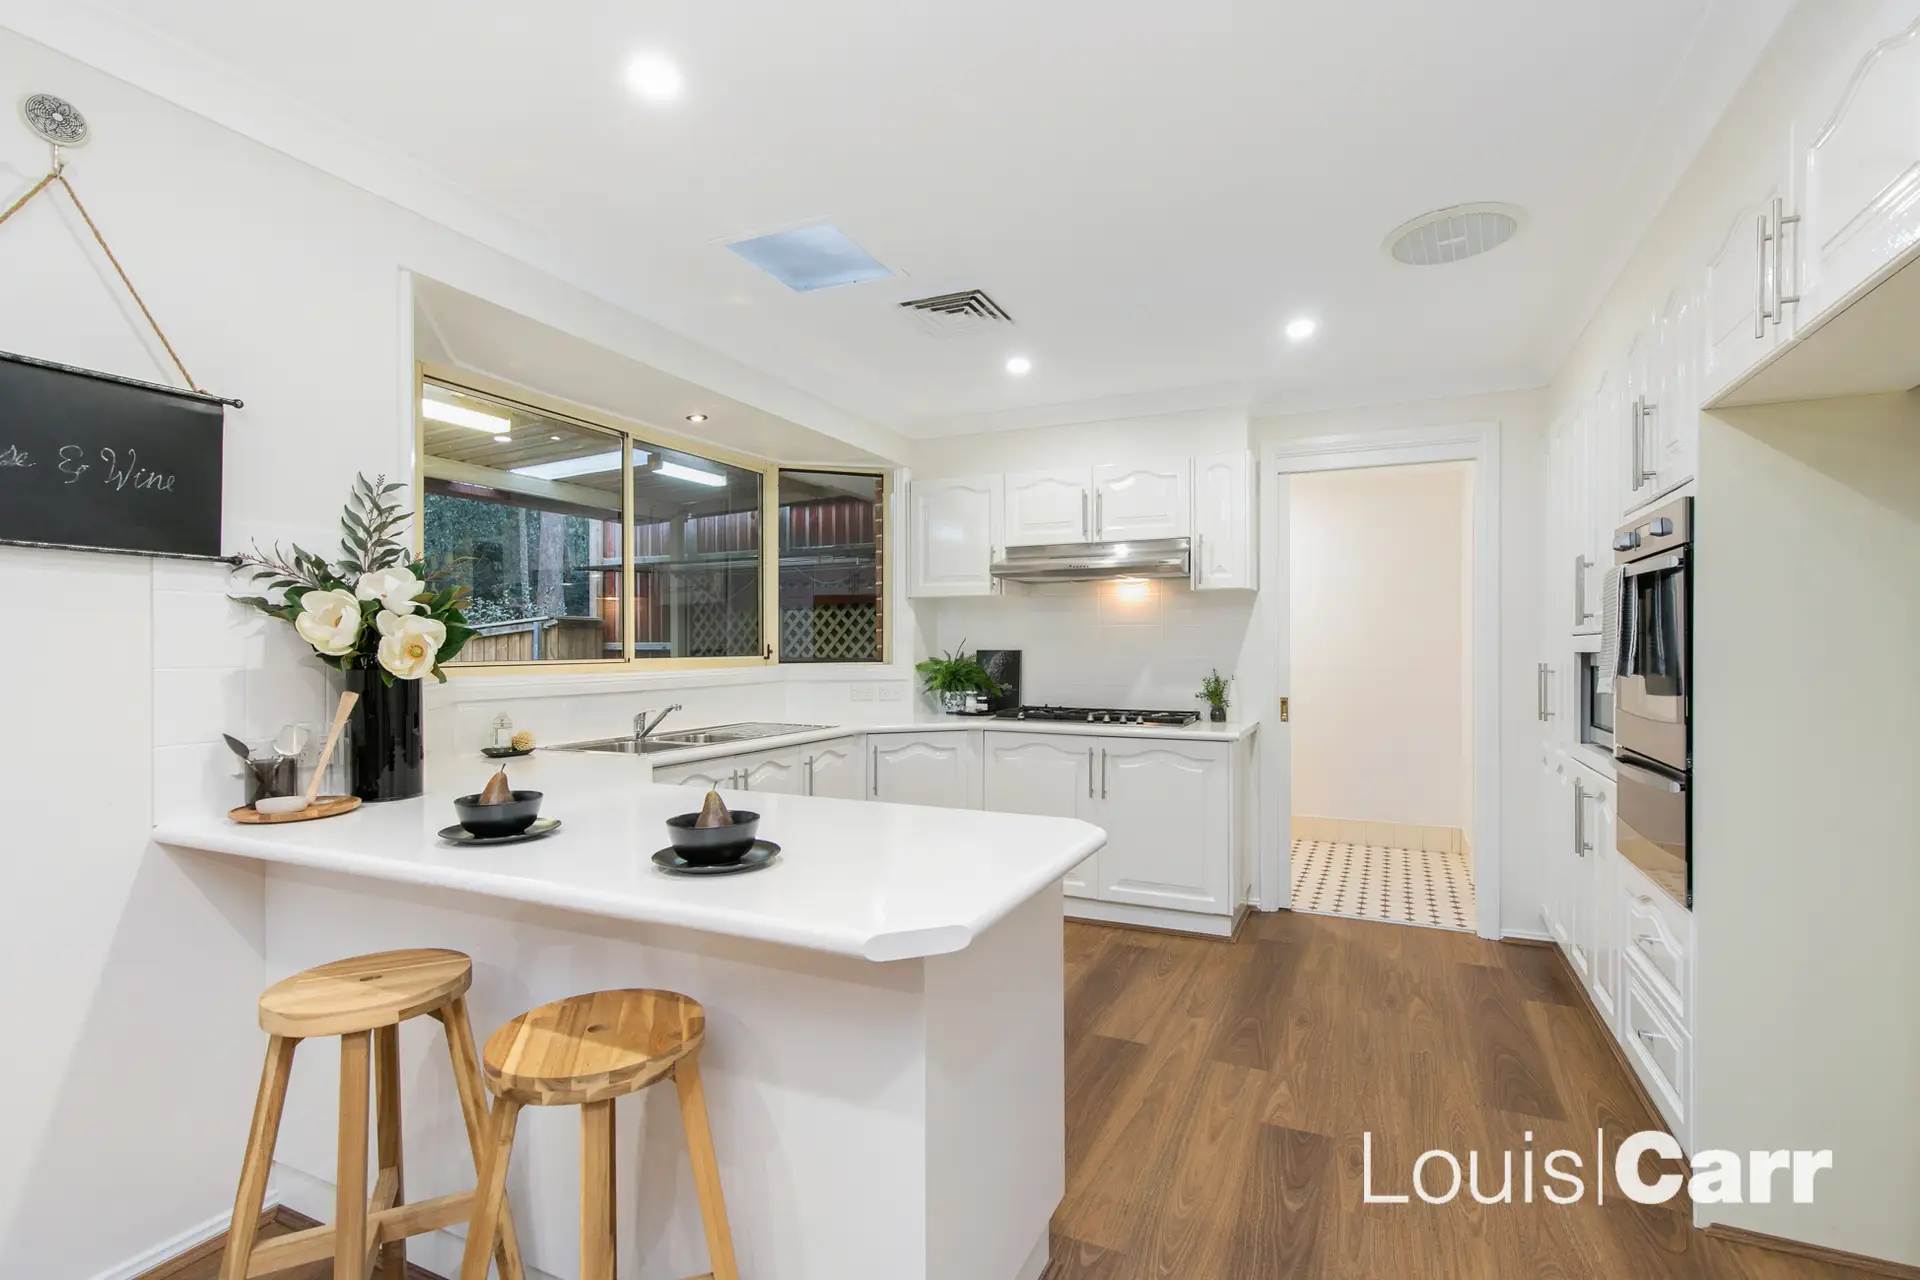 Photo #2: 3a Kings Lynn Court, West Pennant Hills - Sold by Louis Carr Real Estate